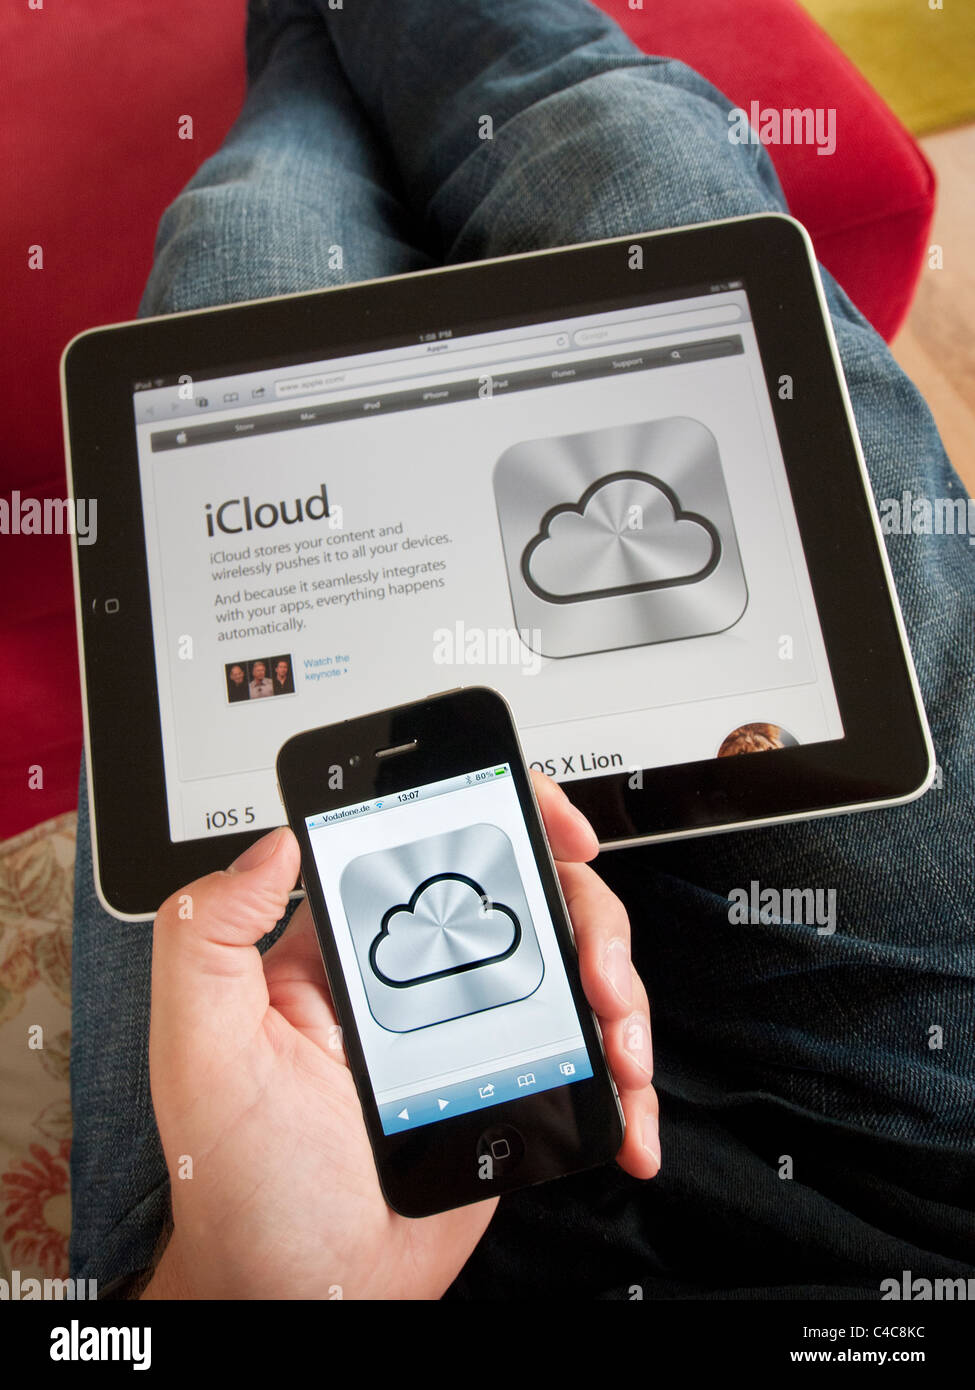 iCloud cloud computing service icon on an iPhone 4G smart phone screen with Apple website on iPad Stock Photo